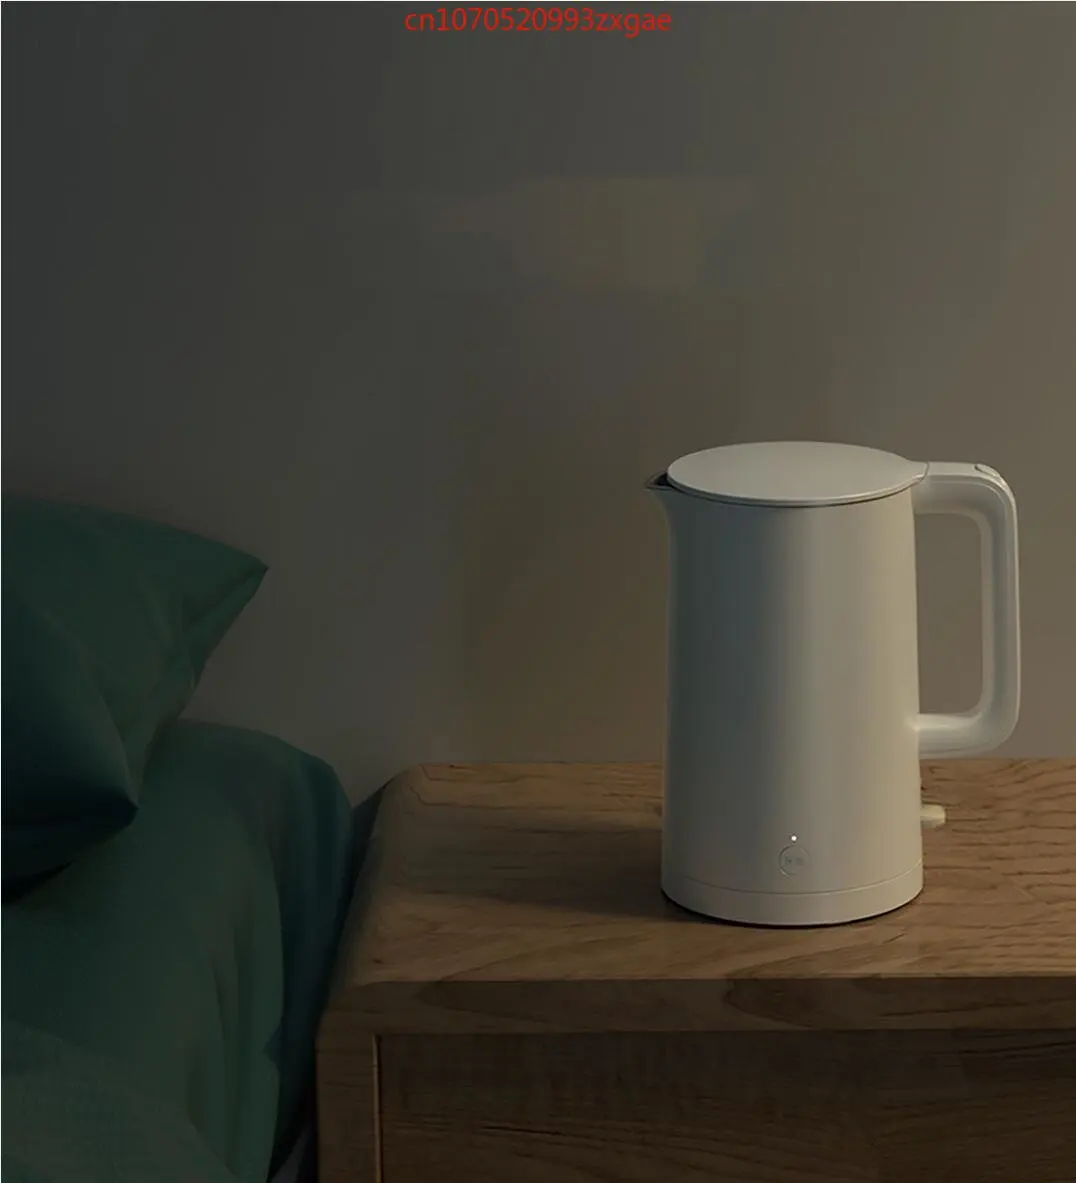 Mijia Electric kettle 1S, 1.7-liter large capacity, and one-button thermal switch to keep 55 degrees warm Xiaomi electric kettle enlarge